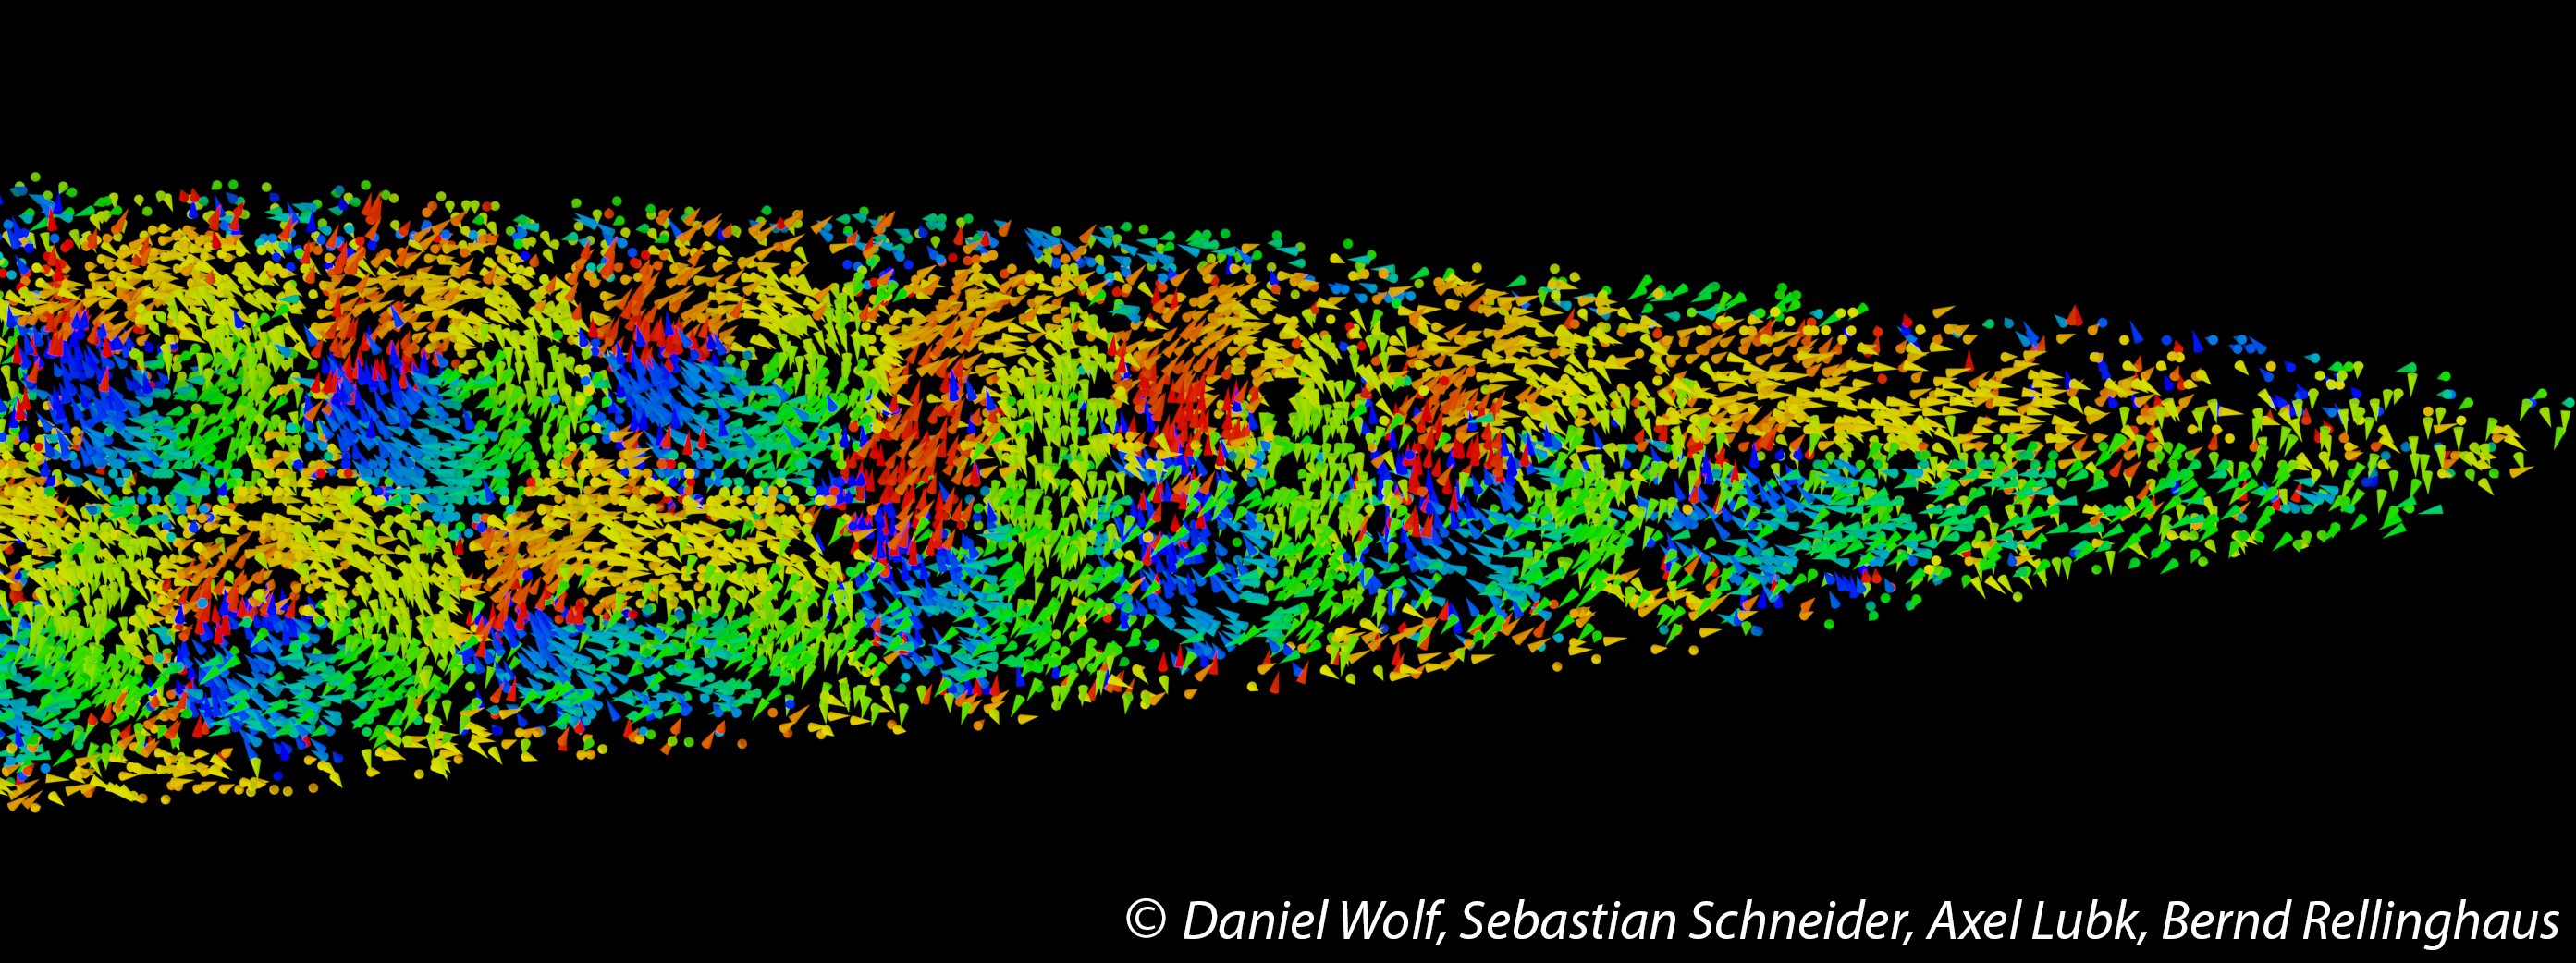 On-axis view on the magnetic whirls of skyrmion tubes in a needle-shaped sample of FeGe. Copyright: Daniel Wolf, Sebastian Schneider, Axel Lubk, Bernd Rellinghaus.